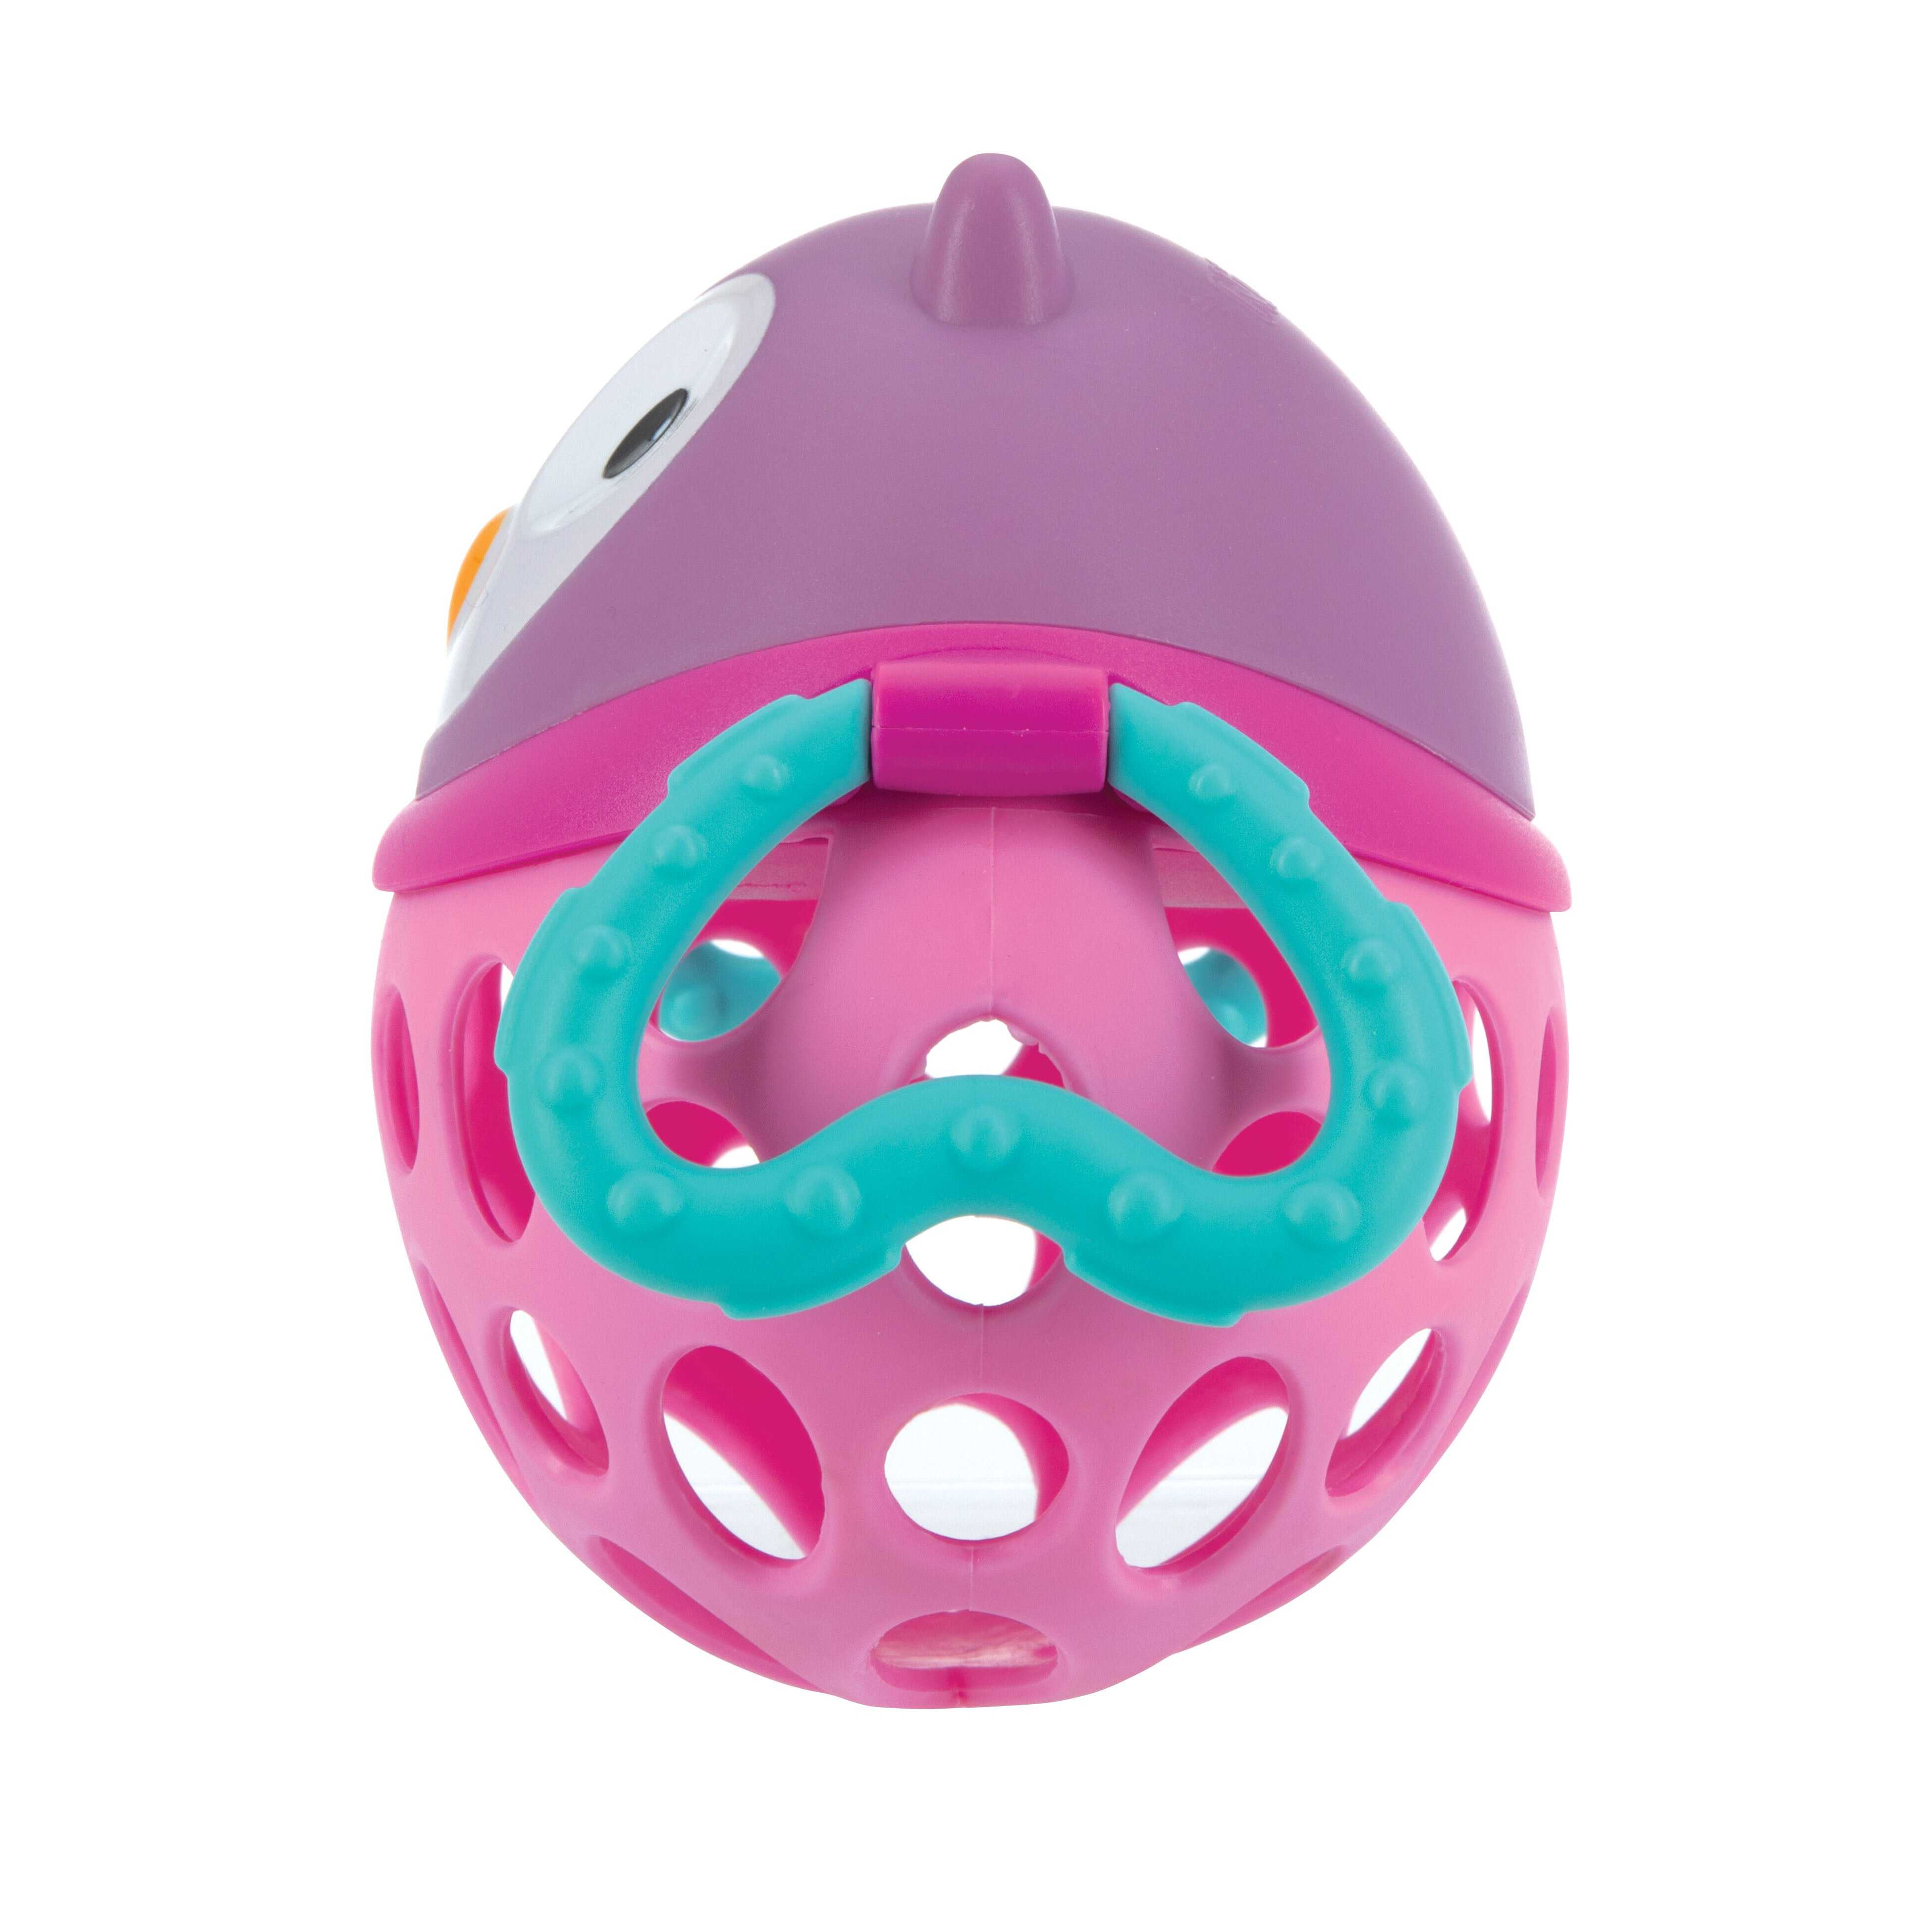 Silly Shaker Rattle Toy - Owl